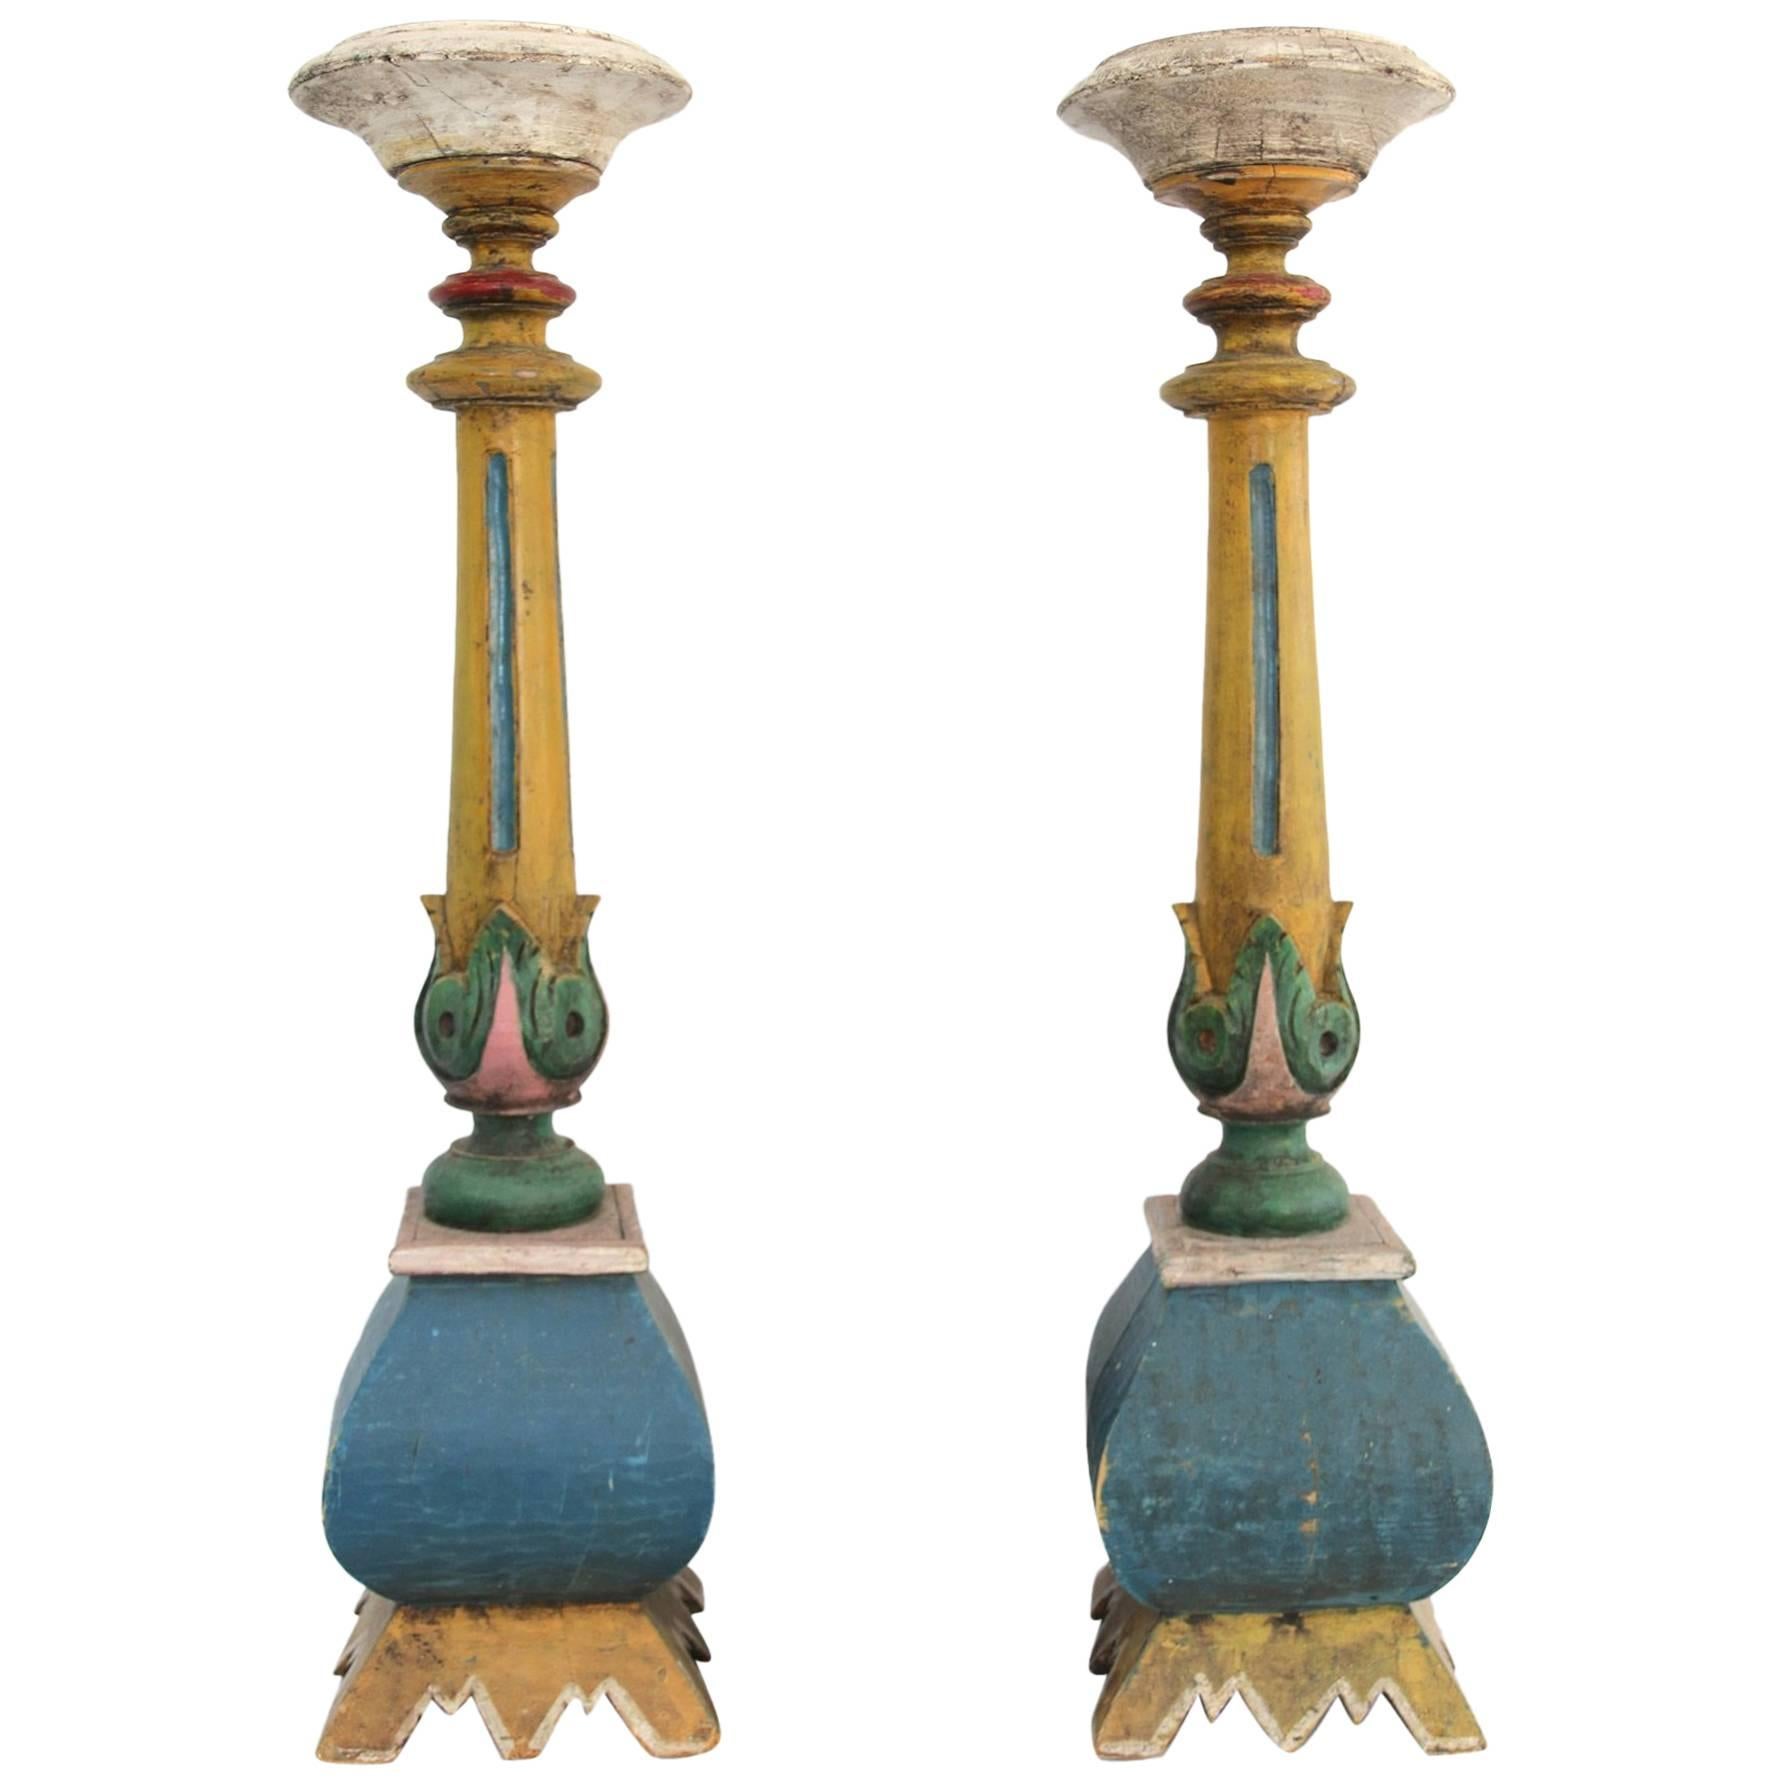 Pair of 19th Century American Polychrome Paint Decorated Candle Pillars For Sale